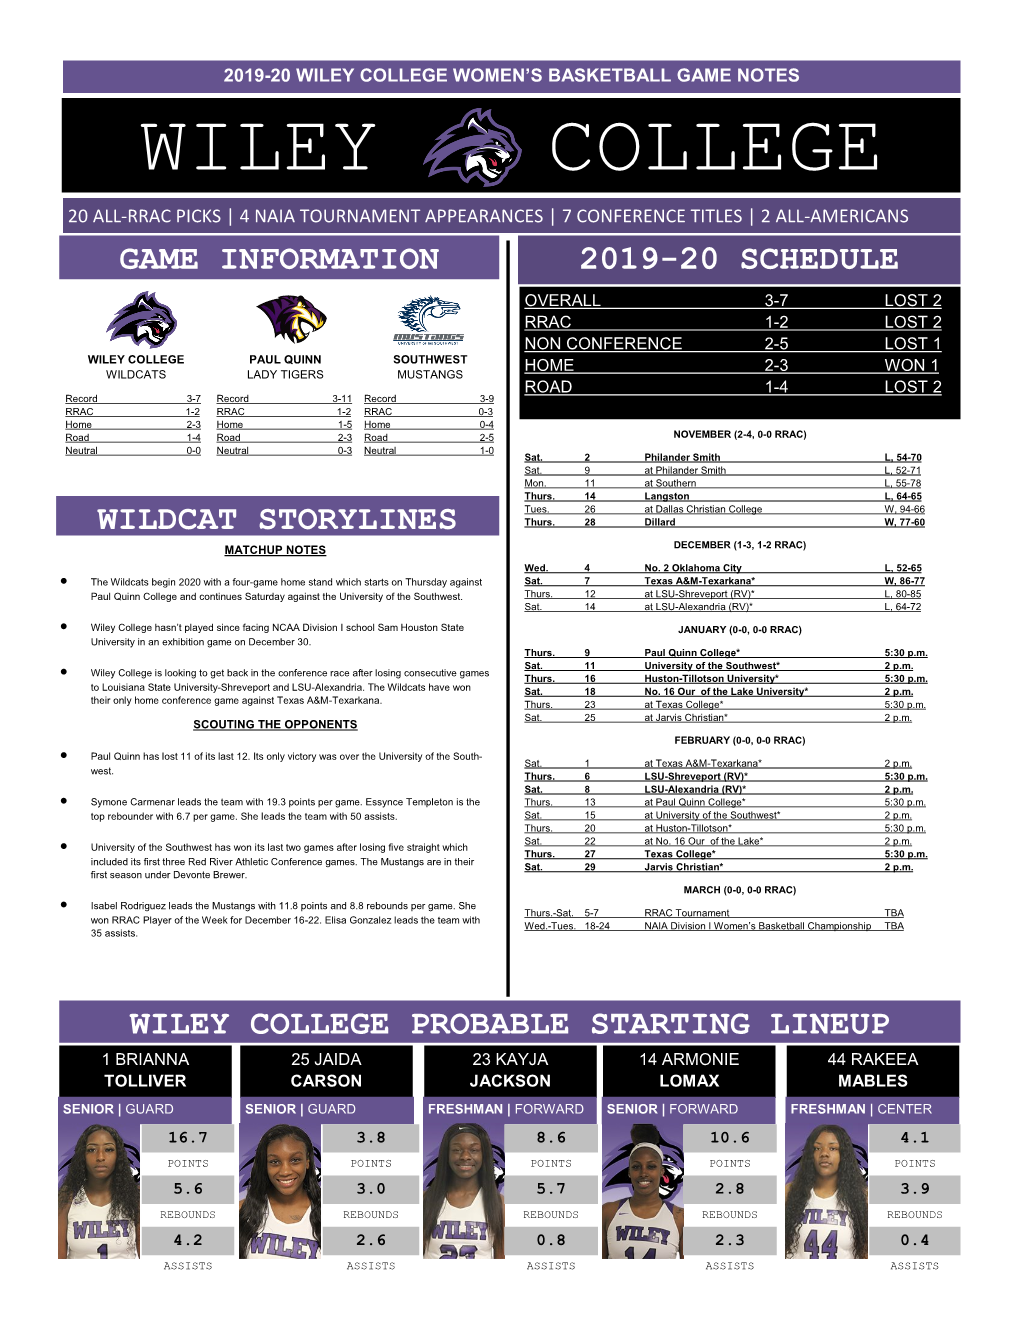 Wiley College Women's Basketball